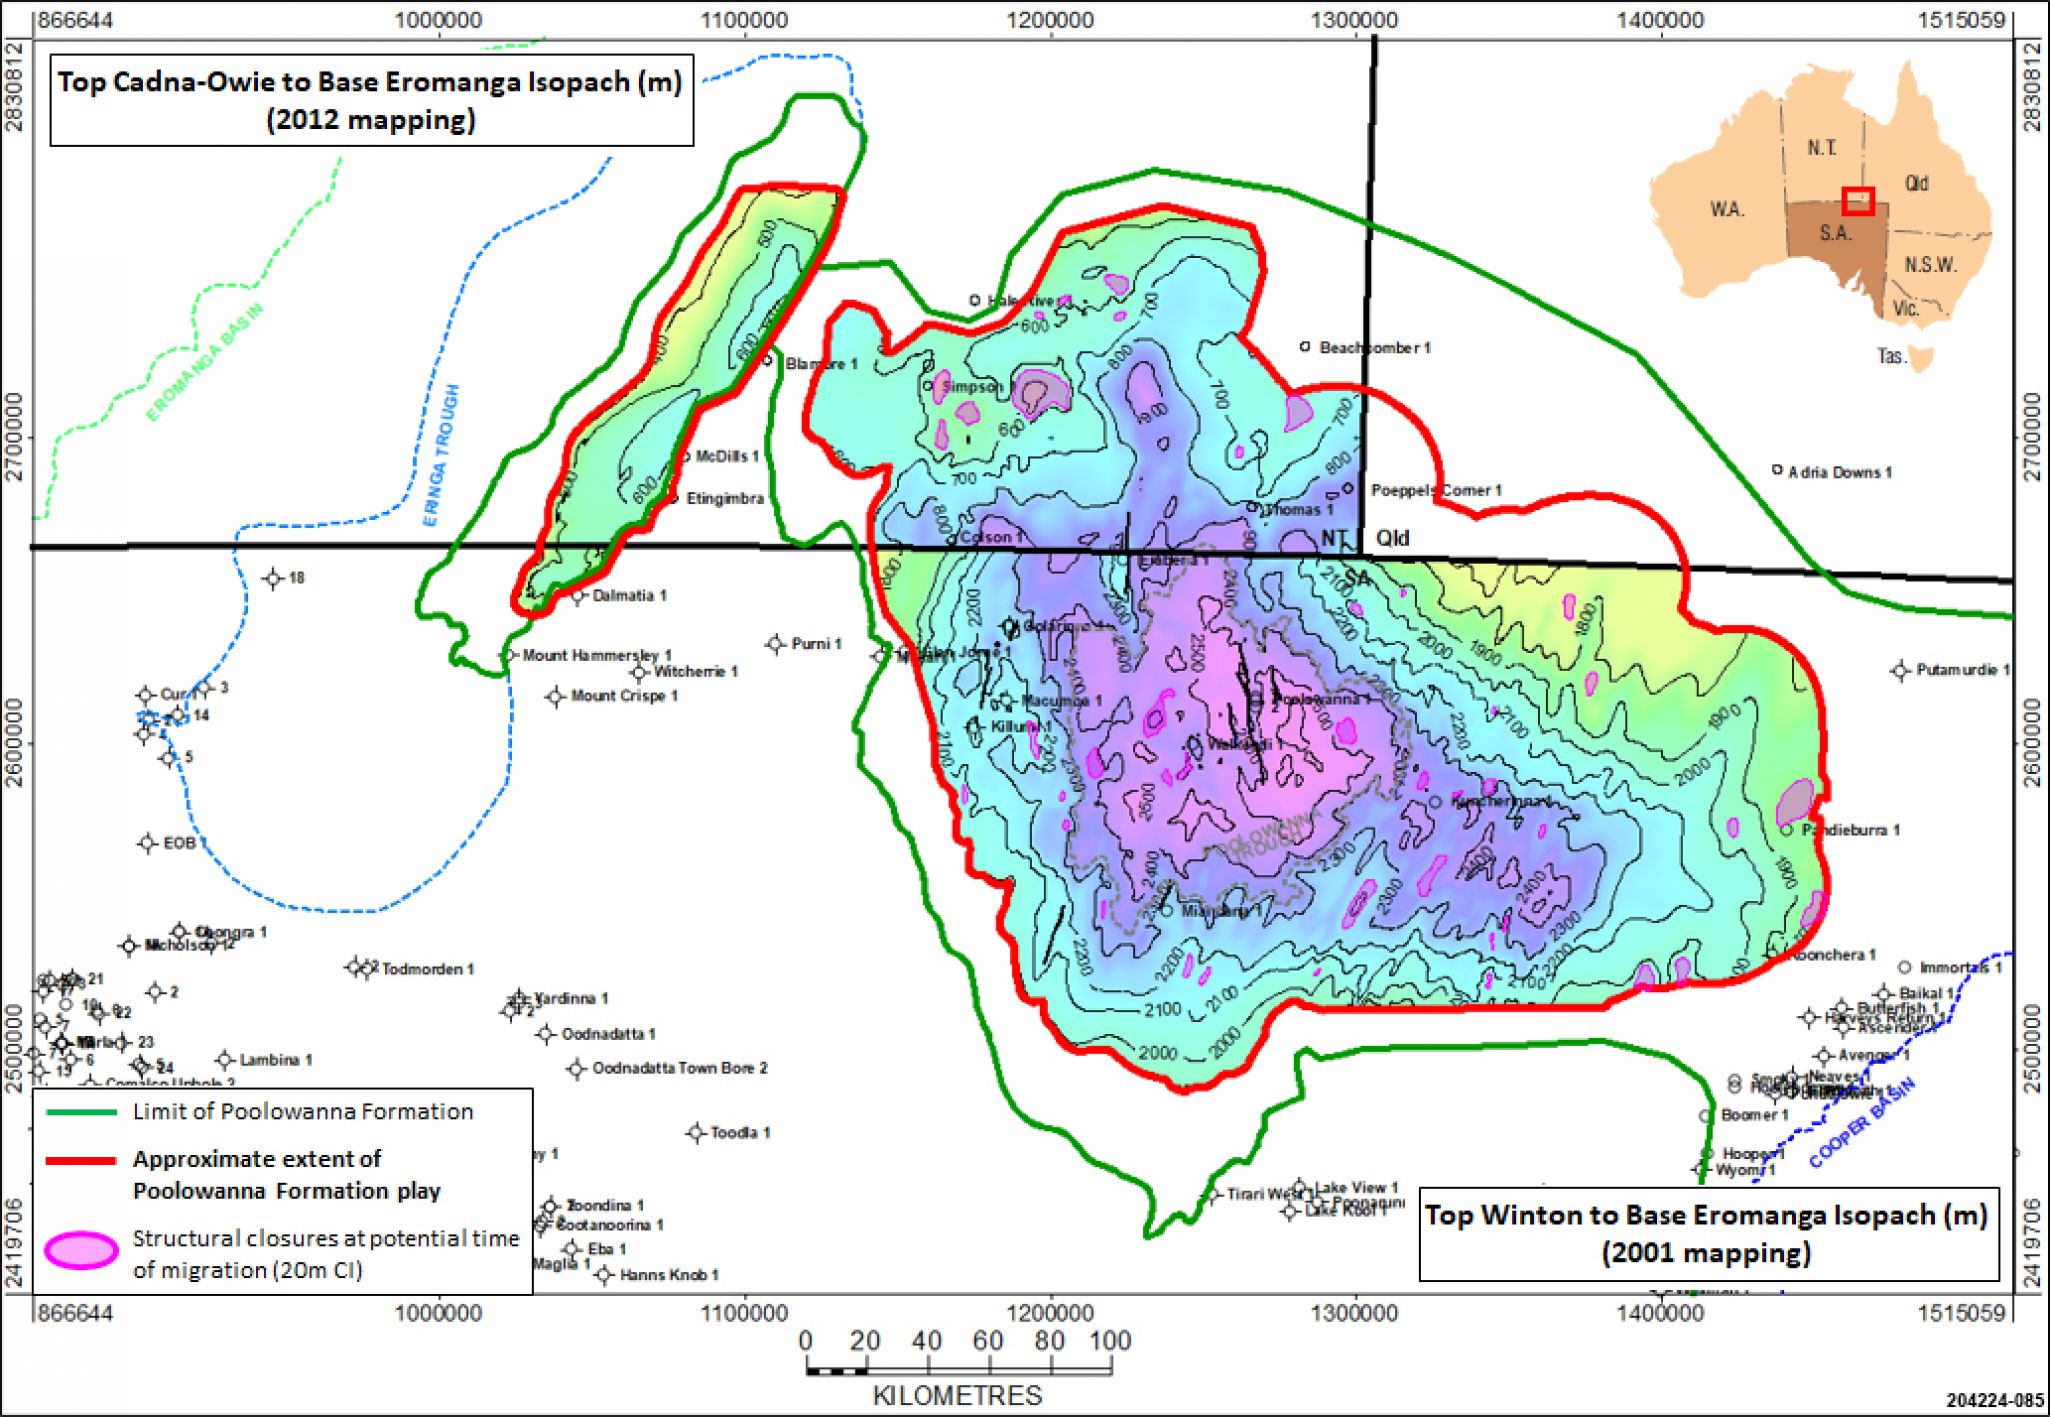 Structural closures within the Poolowanna Formation play area at potential time of migration